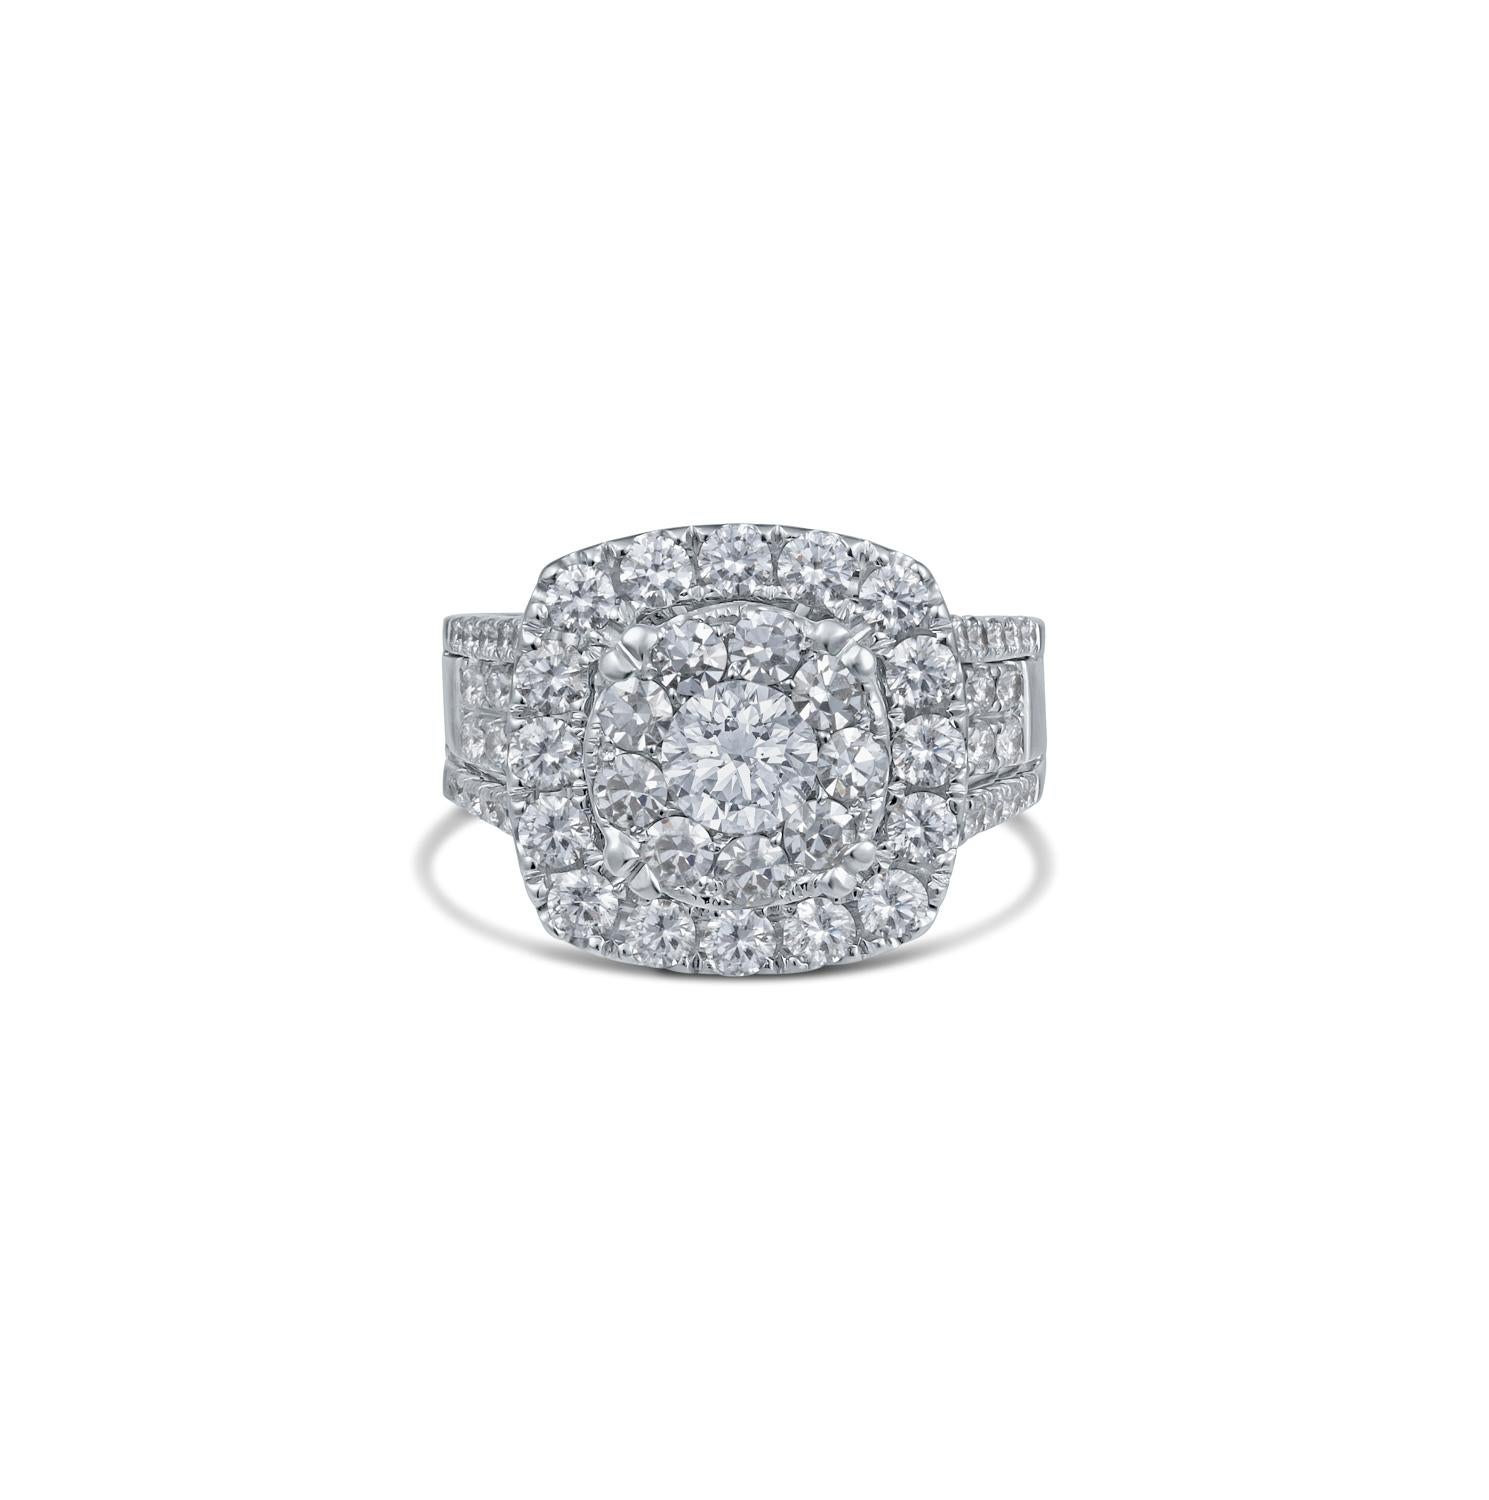 Elevate your style with our breathtaking 18K White Gold Diamond Cluster Ring, a masterpiece that radiates timeless beauty and opulence. At its heart, a dazzling 0.45-carat round diamond takes center stage, capturing the essence of elegance with its